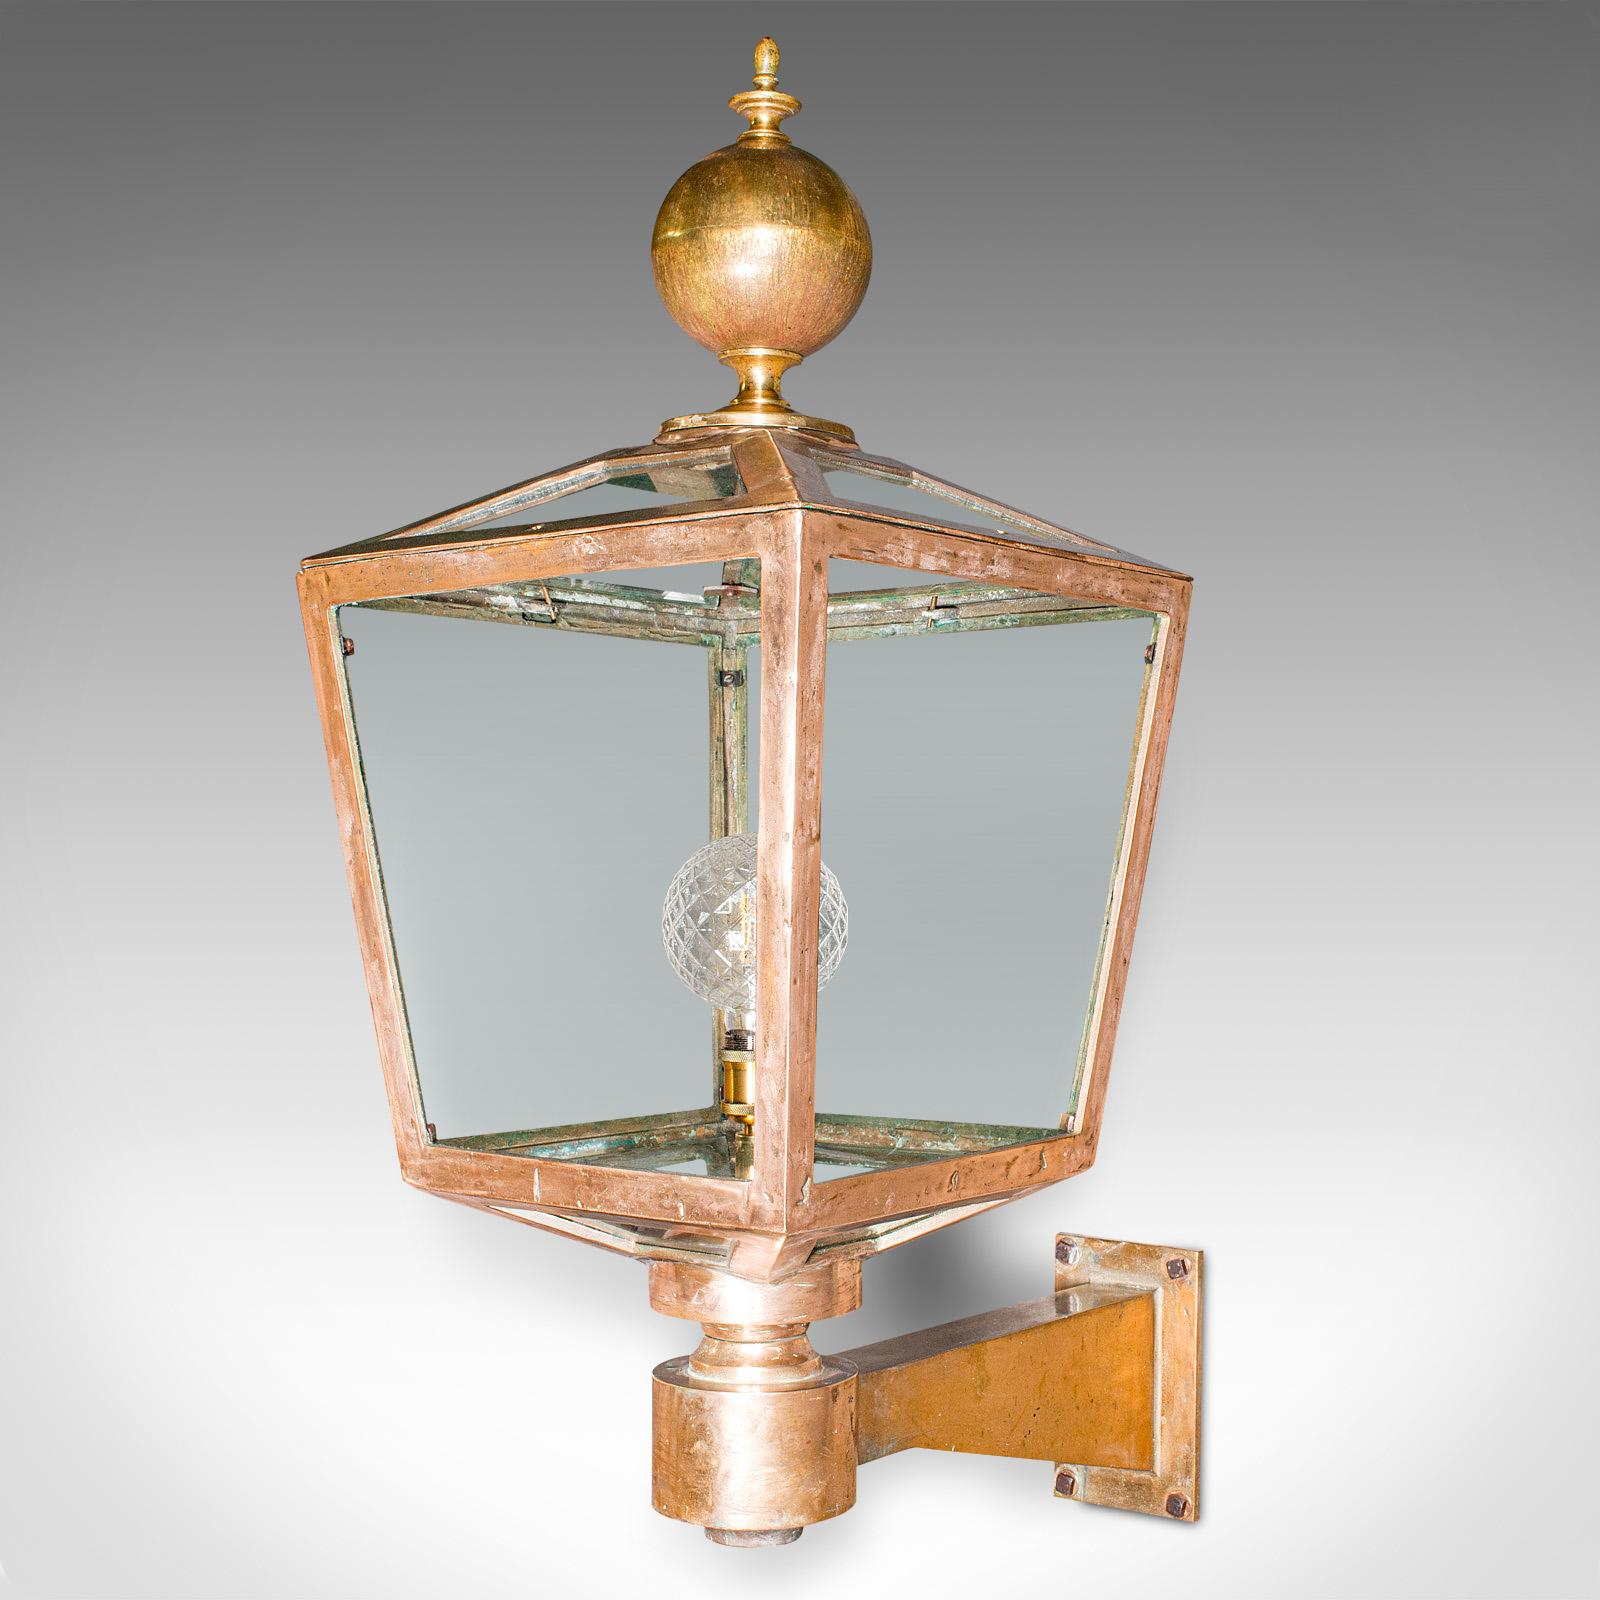 British Large Antique Courtyard Light, English, Bronze, Outdoor Lamp, Victorian, C.1870 For Sale